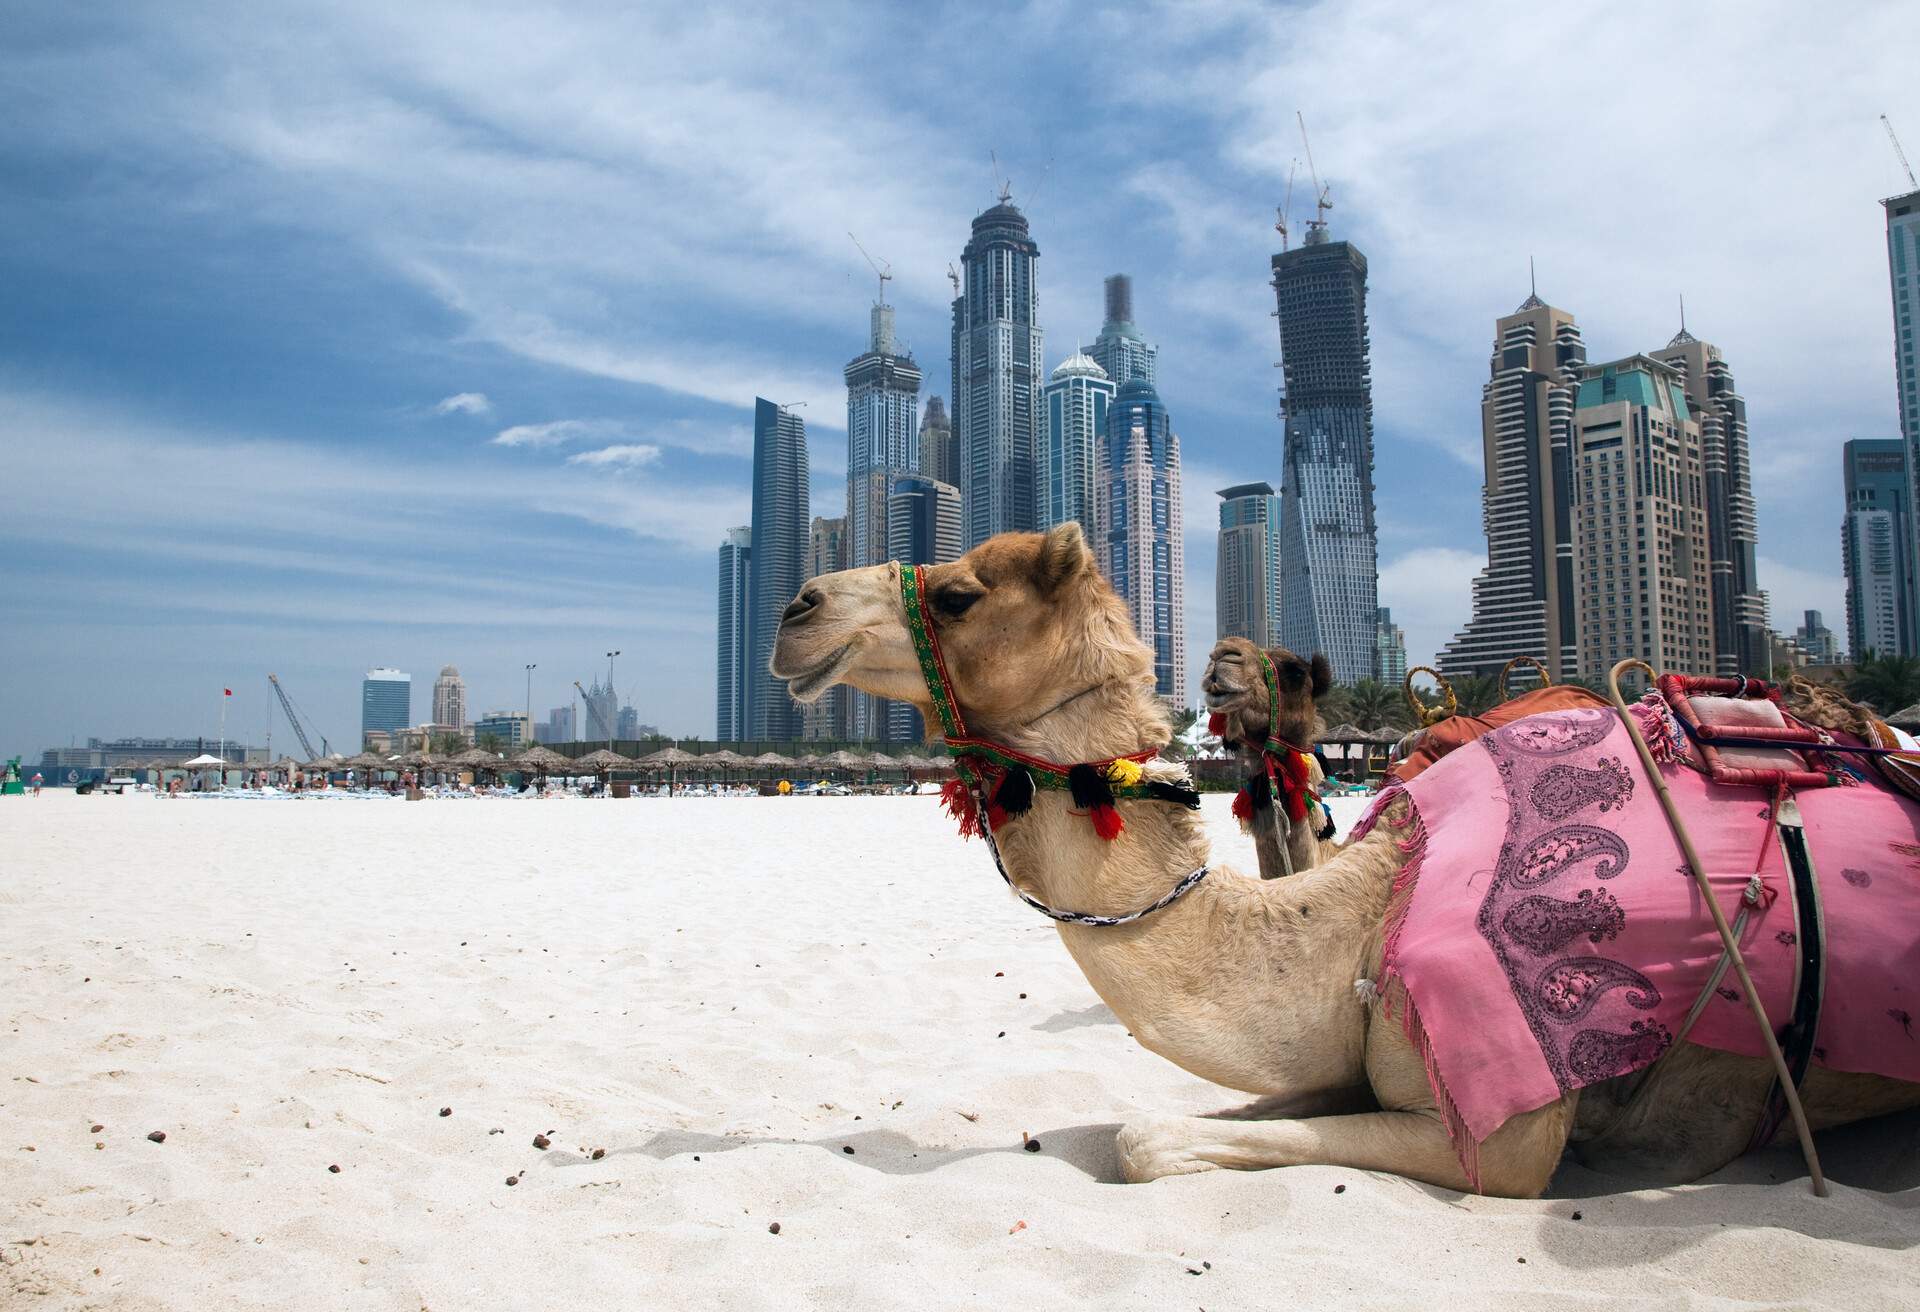 Camel at the urban background of Dubai.